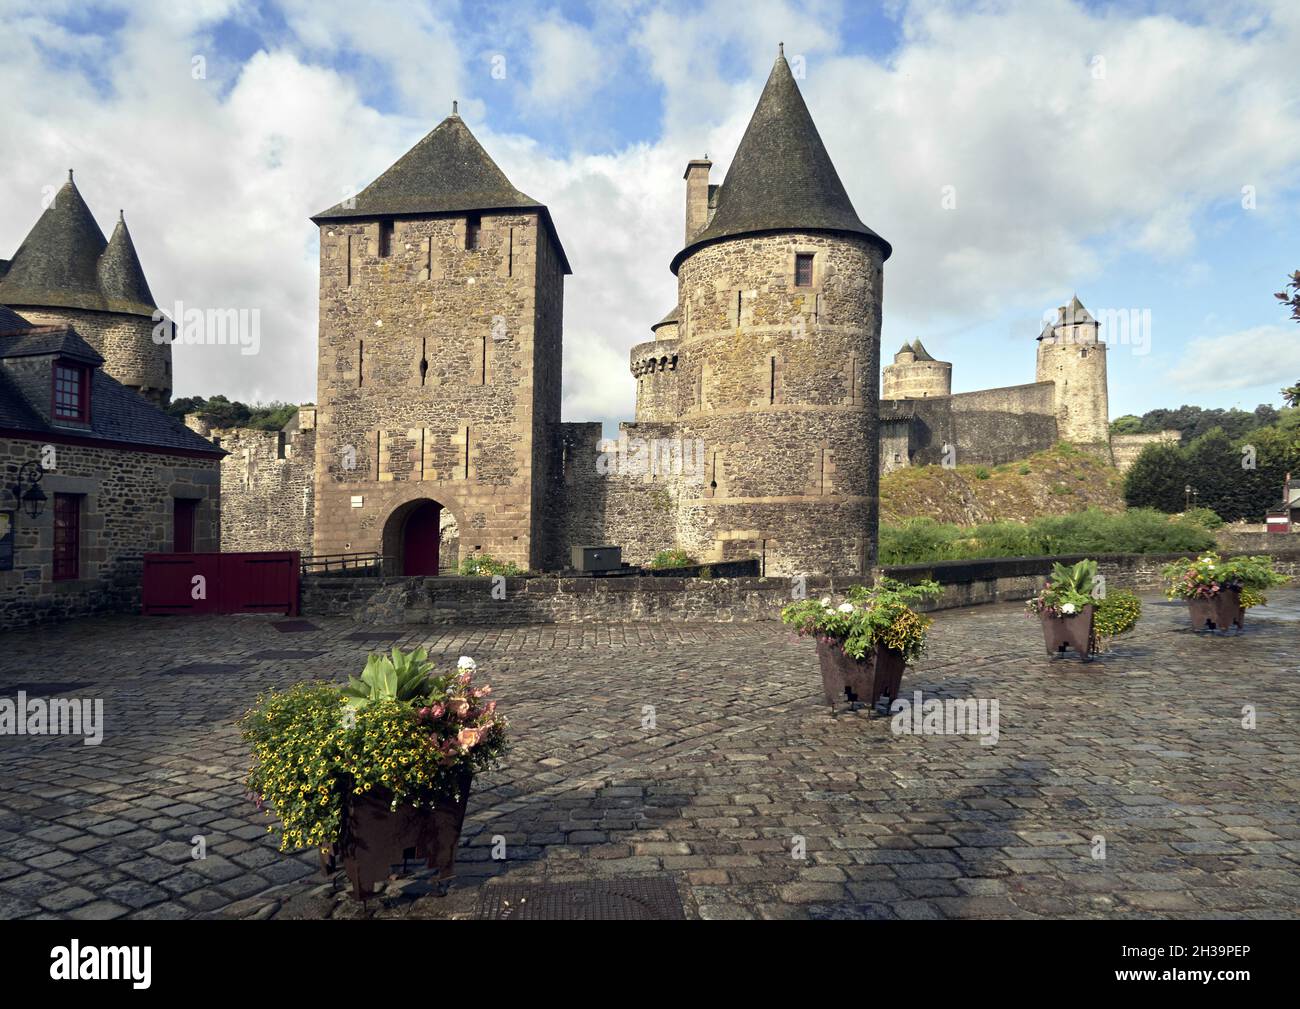 France, Fougeres. The castle first built in the 11th century is one of the best preserved castle in Europe. It was a military stronghold of prime impo Stock Photo